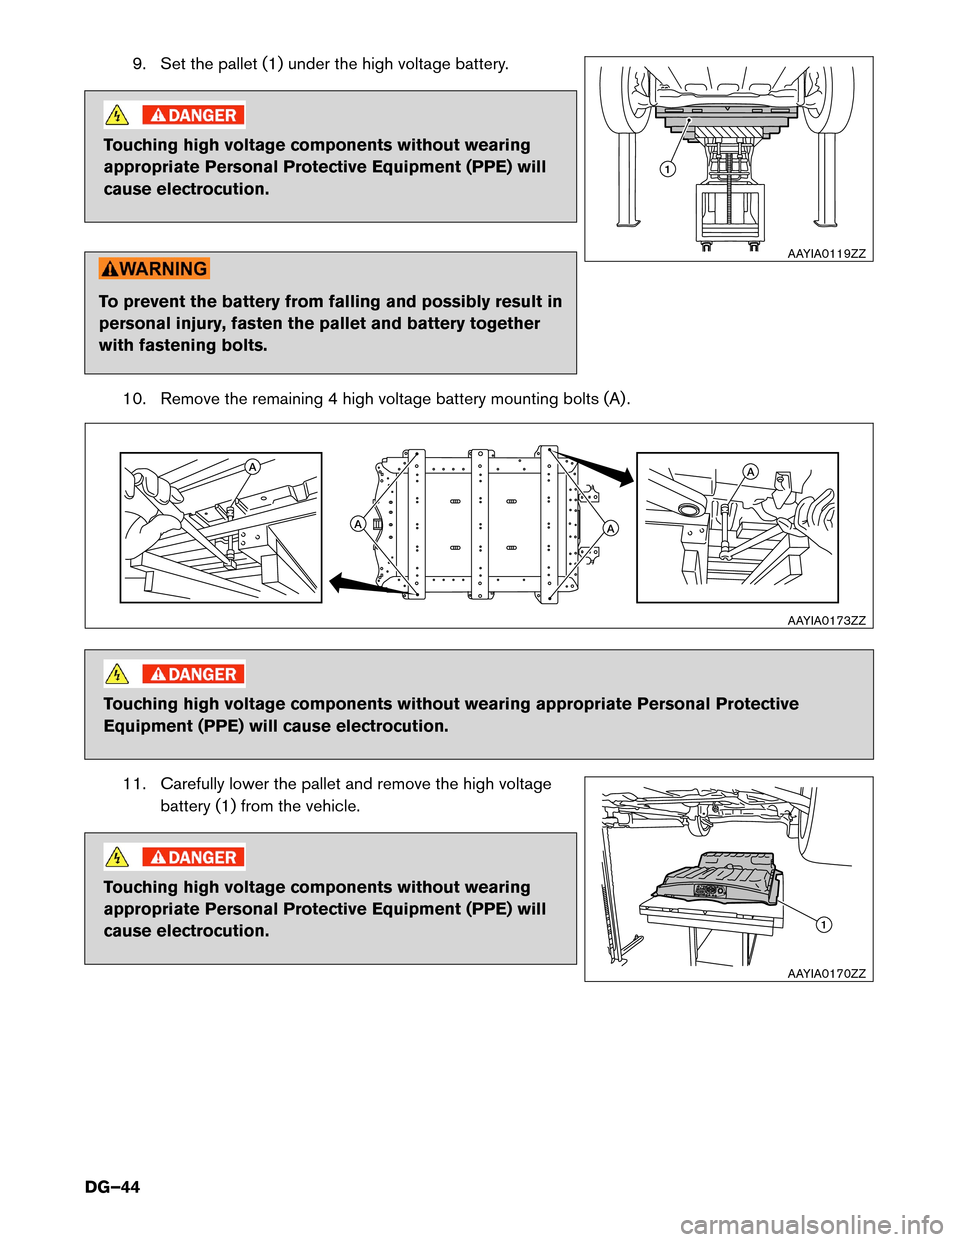 NISSAN LEAF 2016 1.G Dismantling Guide 9. Set the pallet (1) under the high voltage battery.
Touching high voltage components without wearing
appropriate
Personal Protective Equipment (PPE) will
cause electrocution. To prevent the battery 